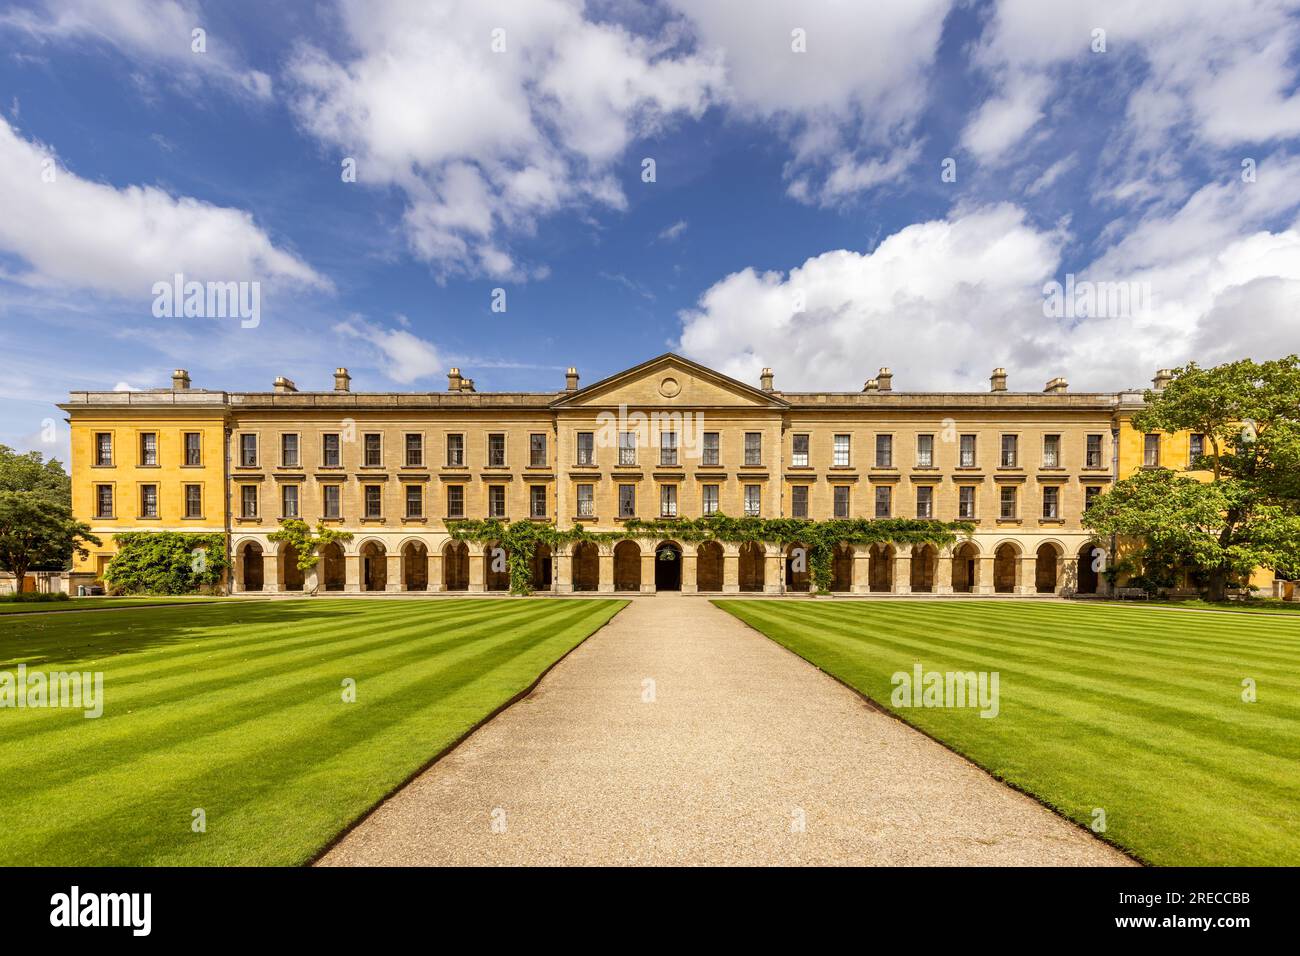 New Building, Magdalen College, Oxford University, Oxford, Oxfordshire, England, UK Stock Photo